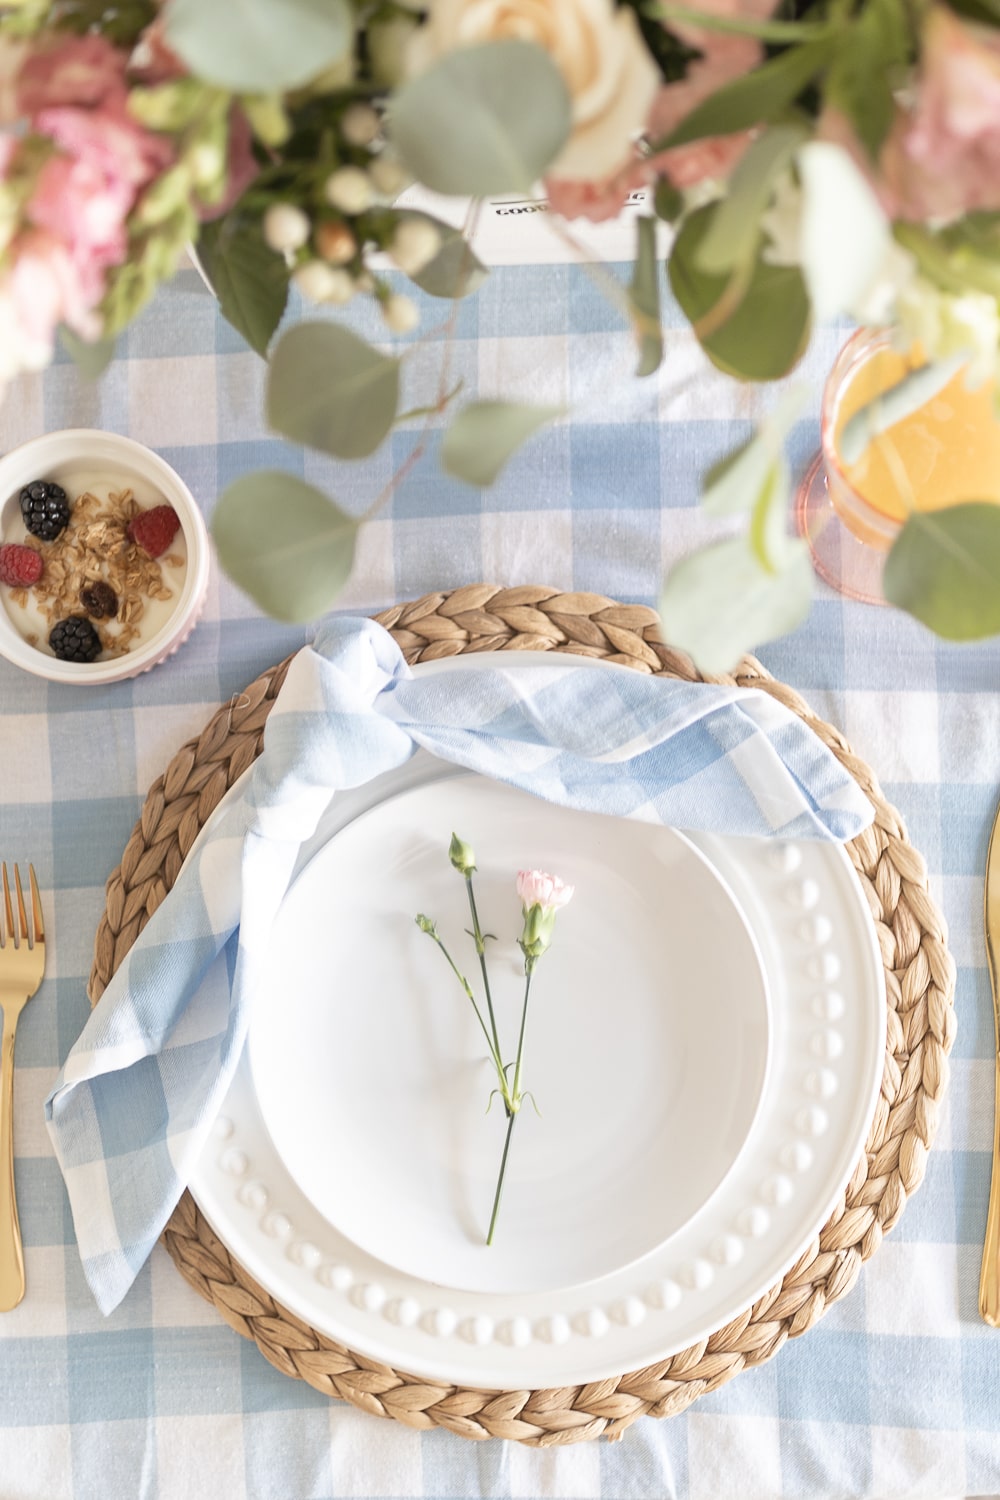 Mother’s Day brunch decorating ideas from southern blogger Stephanie Ziajka on Diary of a Debutante